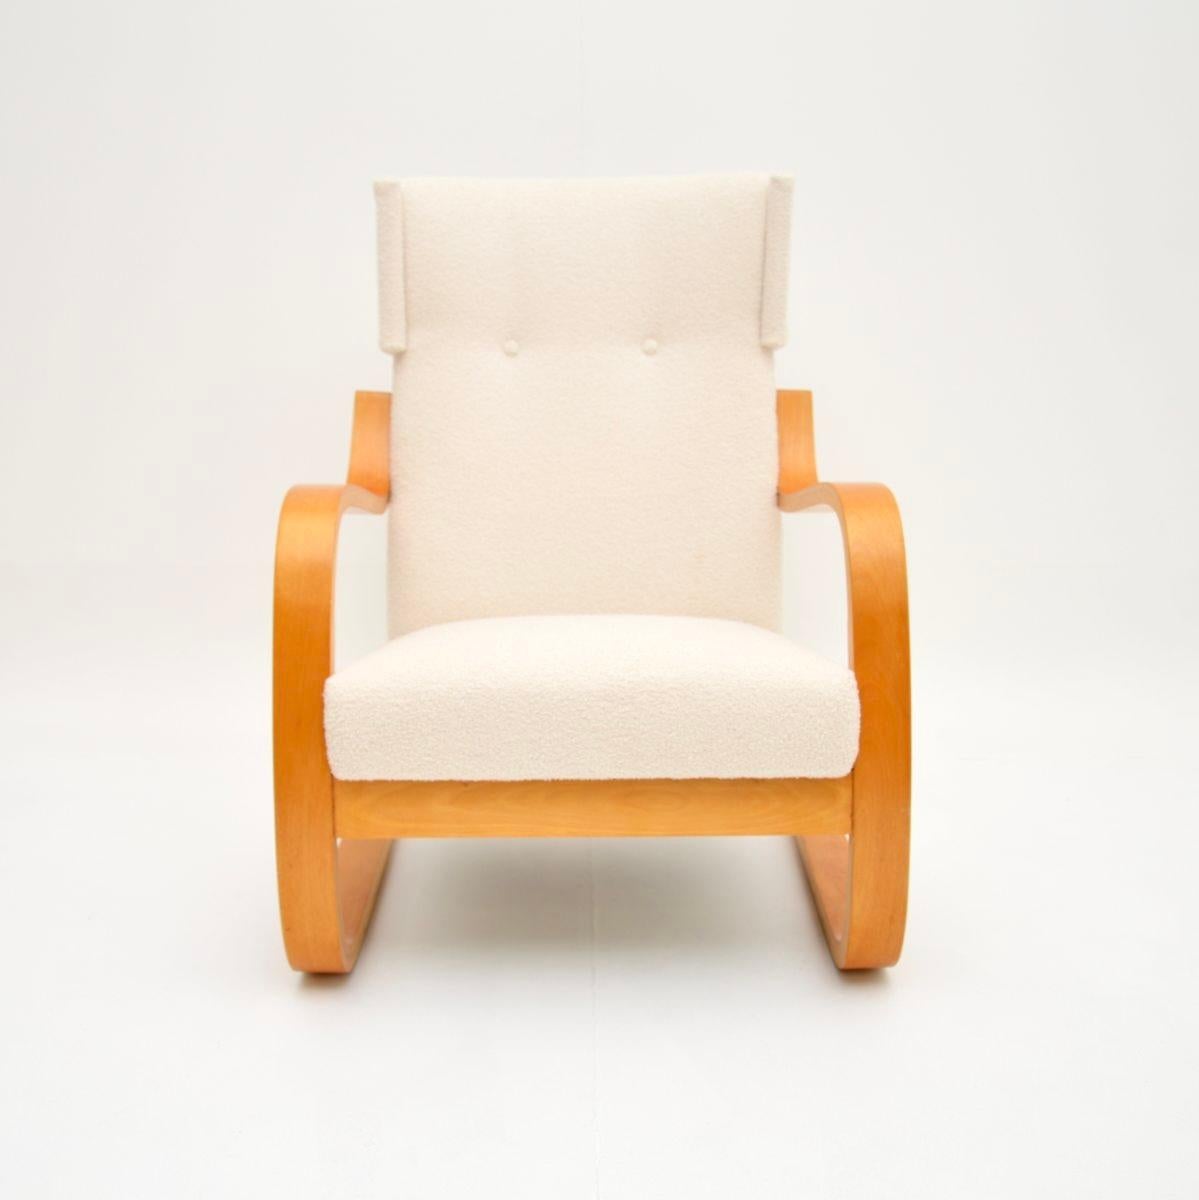 An iconic and rare vintage model 401 armchair by Alvar Aalto. This was made in Finland by Artek, it dates from around the 1970’s.

It is of exceptional quality and is extremely comfortable. The seating area is very supportive and this rocks nicely